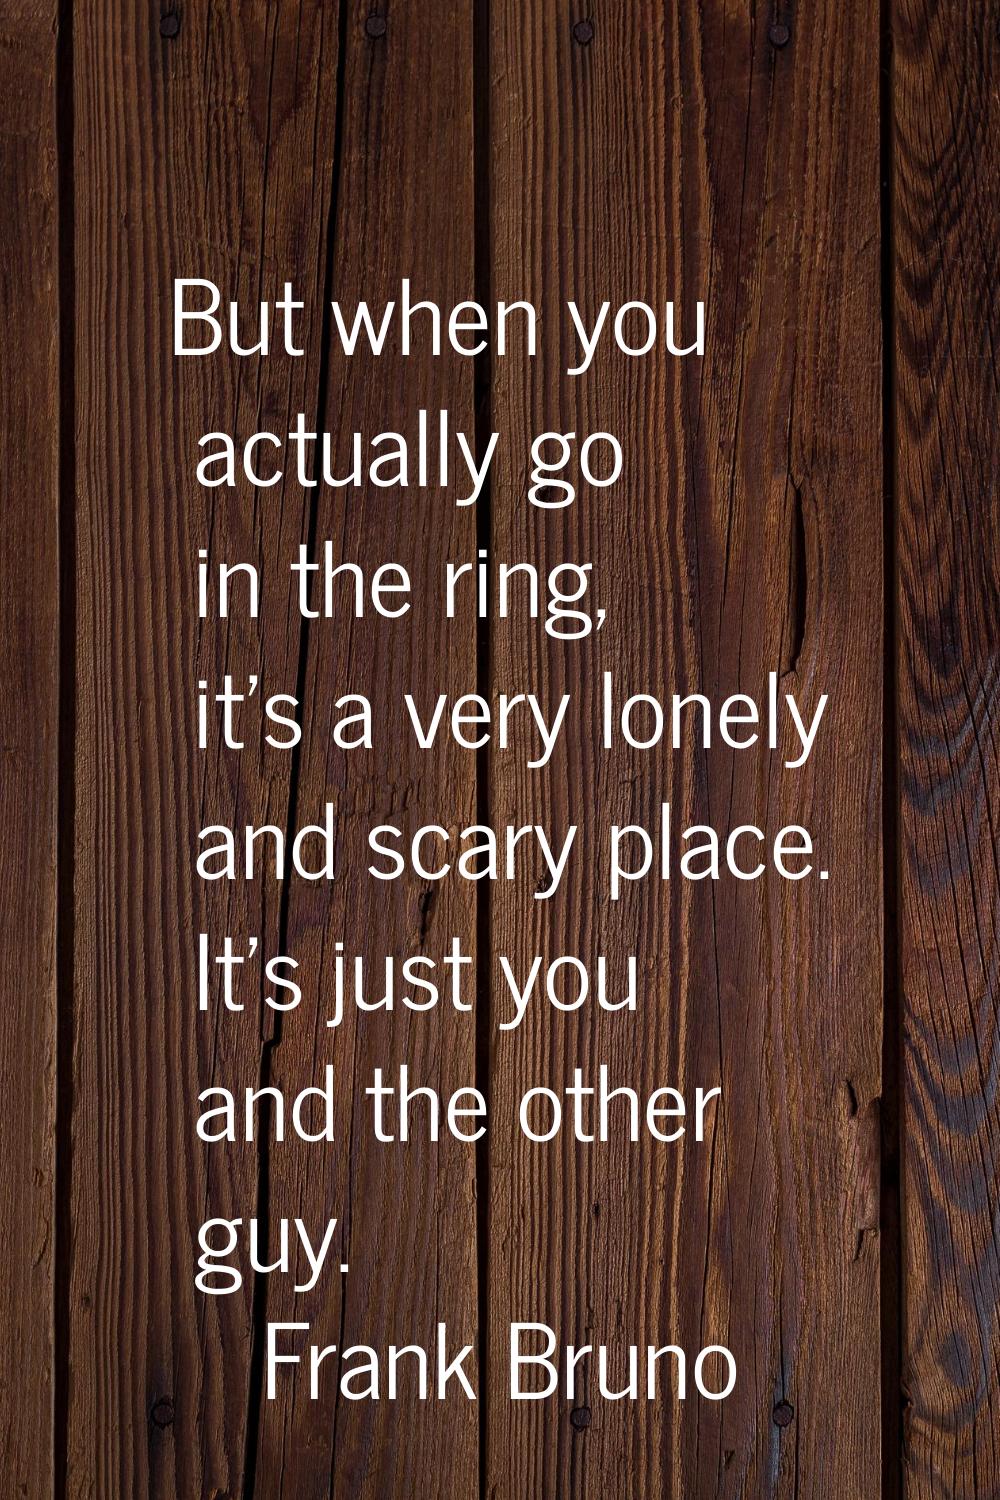 But when you actually go in the ring, it's a very lonely and scary place. It's just you and the oth